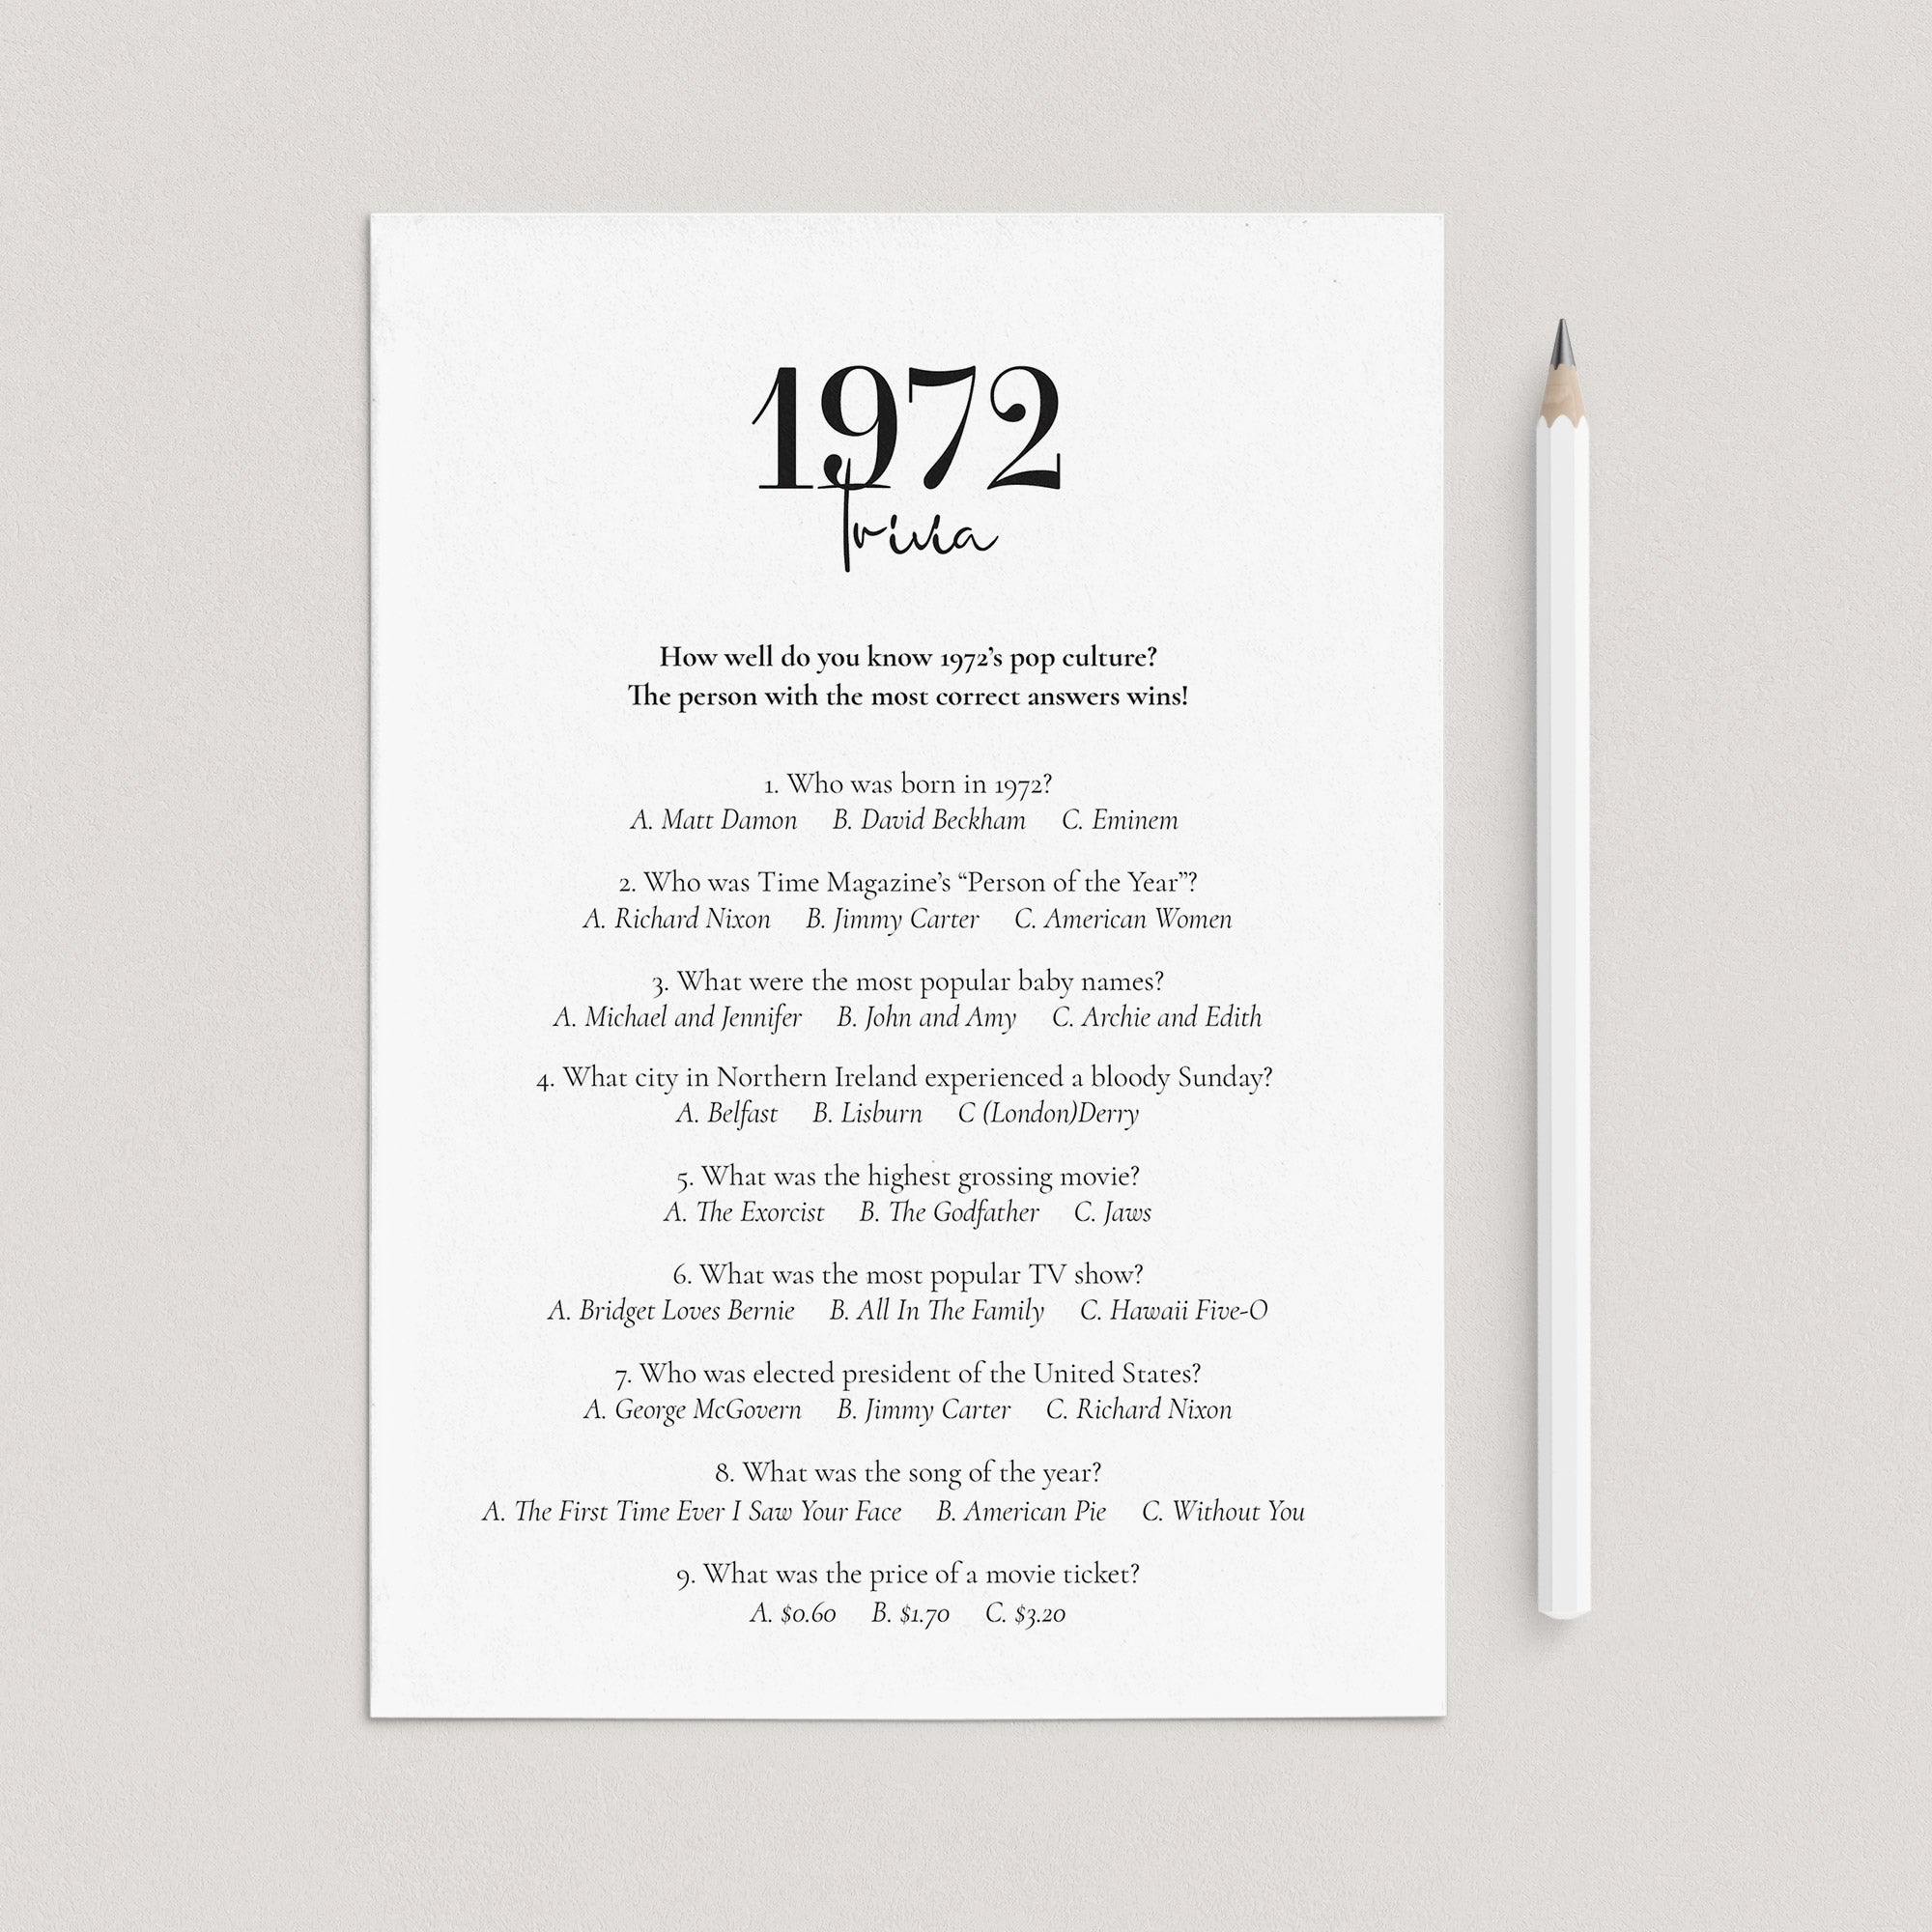 1972 Trivia Questions and Answers Printable Instant Download